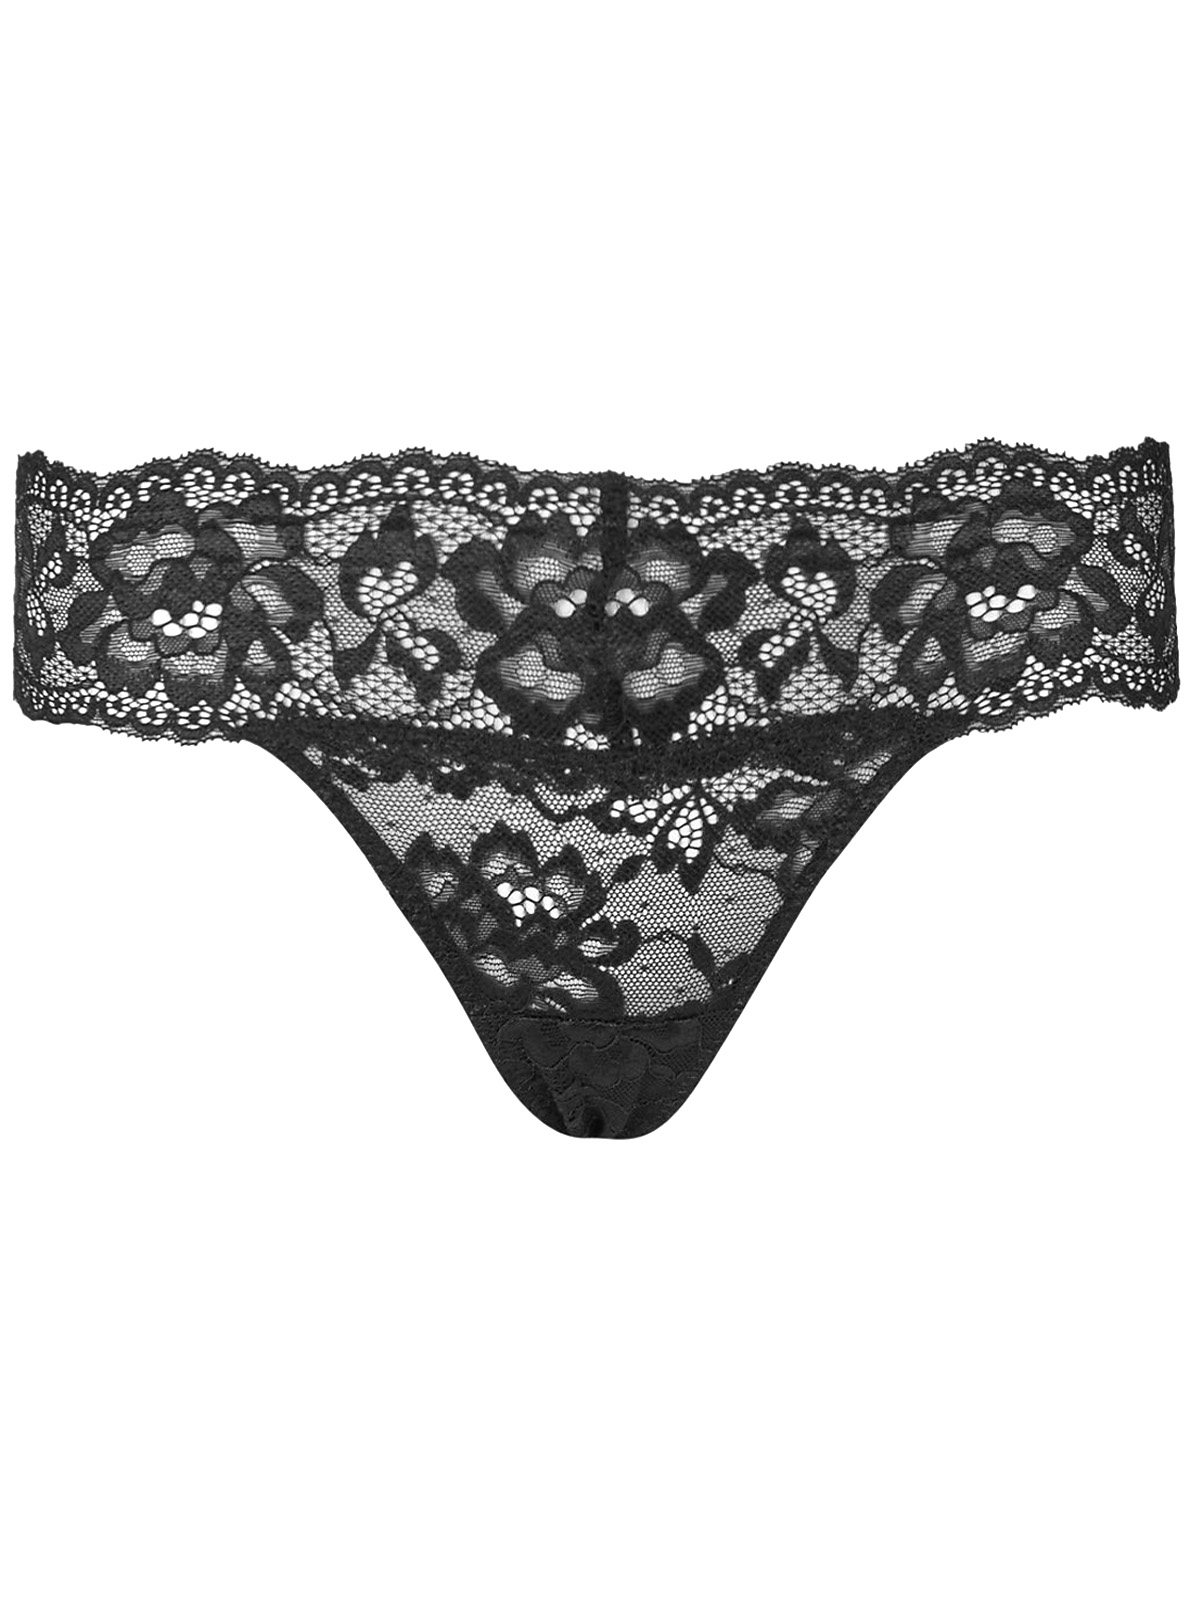 Marks and Spencer - - M&5 BLACK Floral Lace Thong - Size 6 to 16